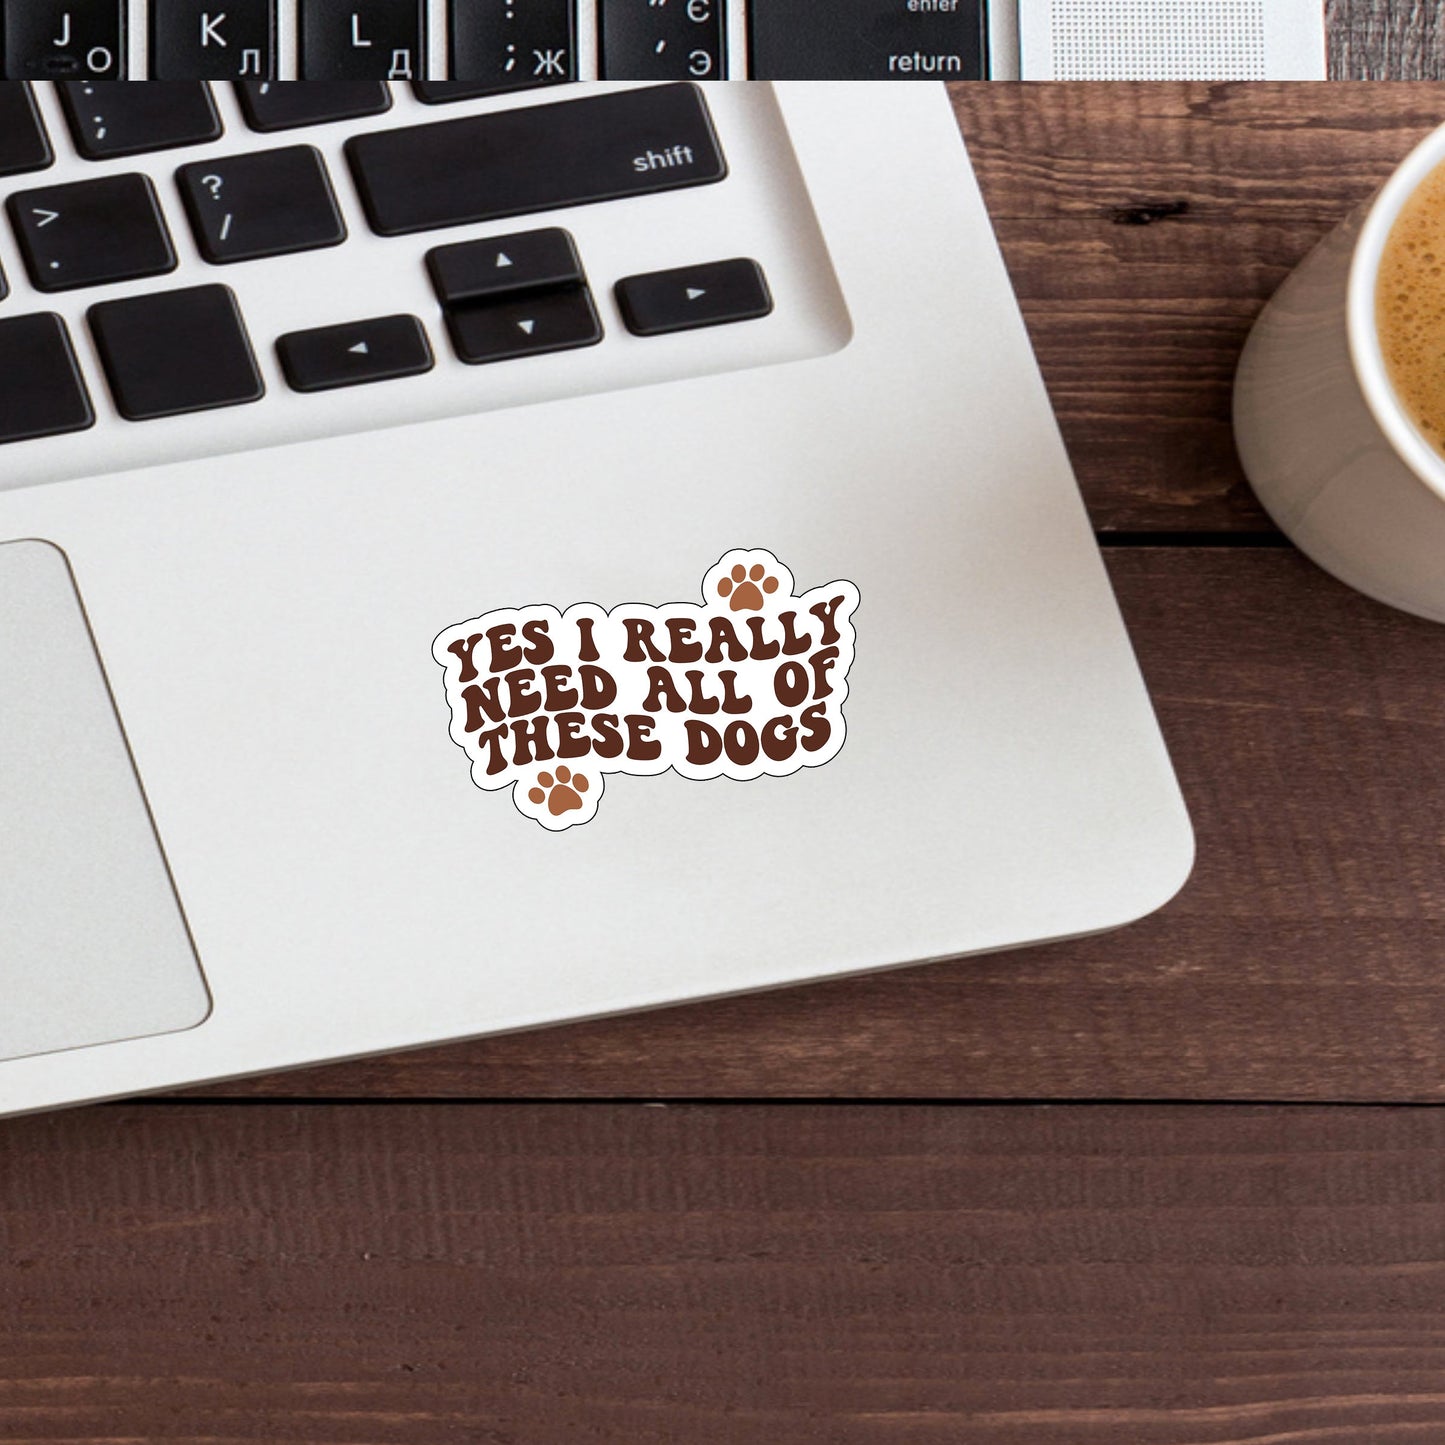 Yes I really need all of these dogs  Sticker,  Vinyl sticker, laptop sticker, Tablet sticker